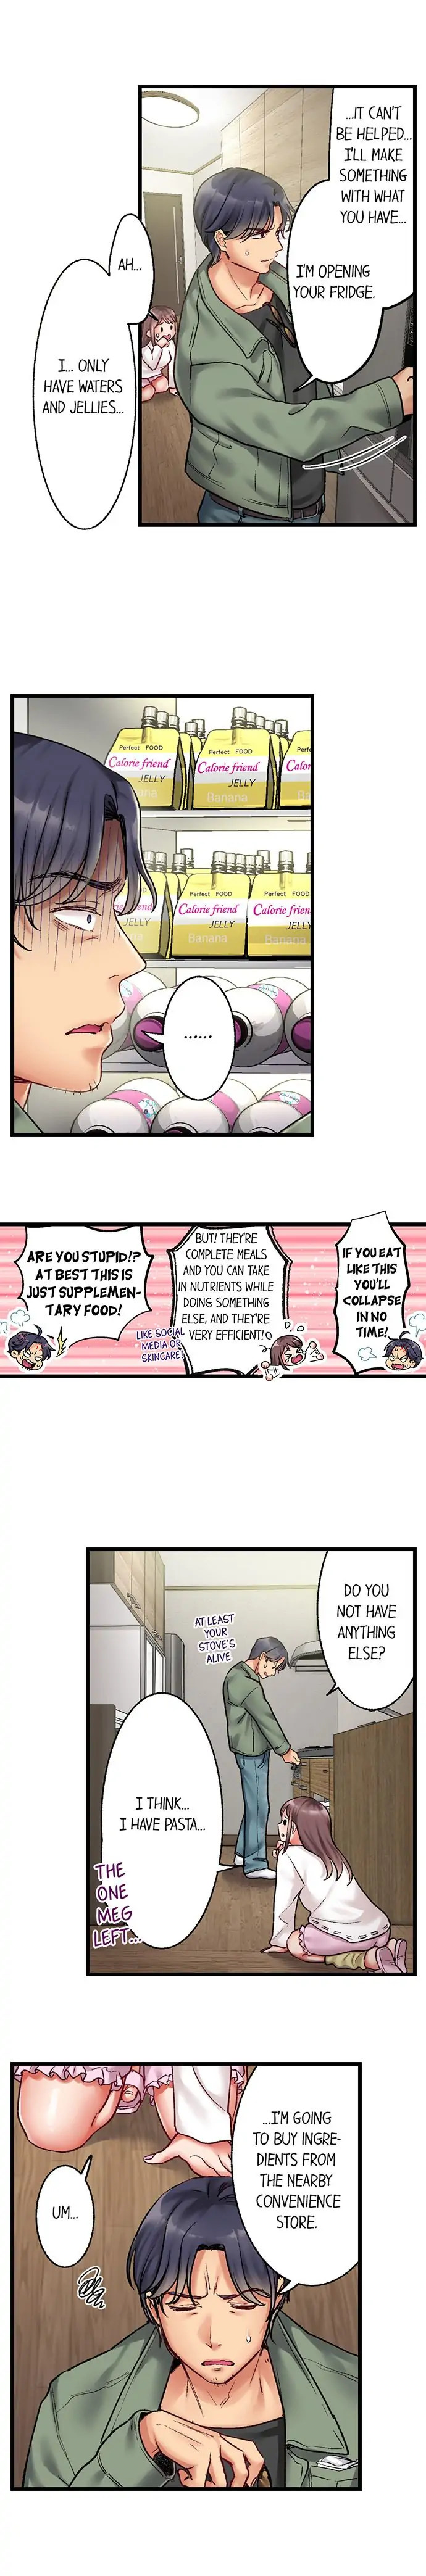 Show Me What Comes After Kissing - Chapter 7 Page 8